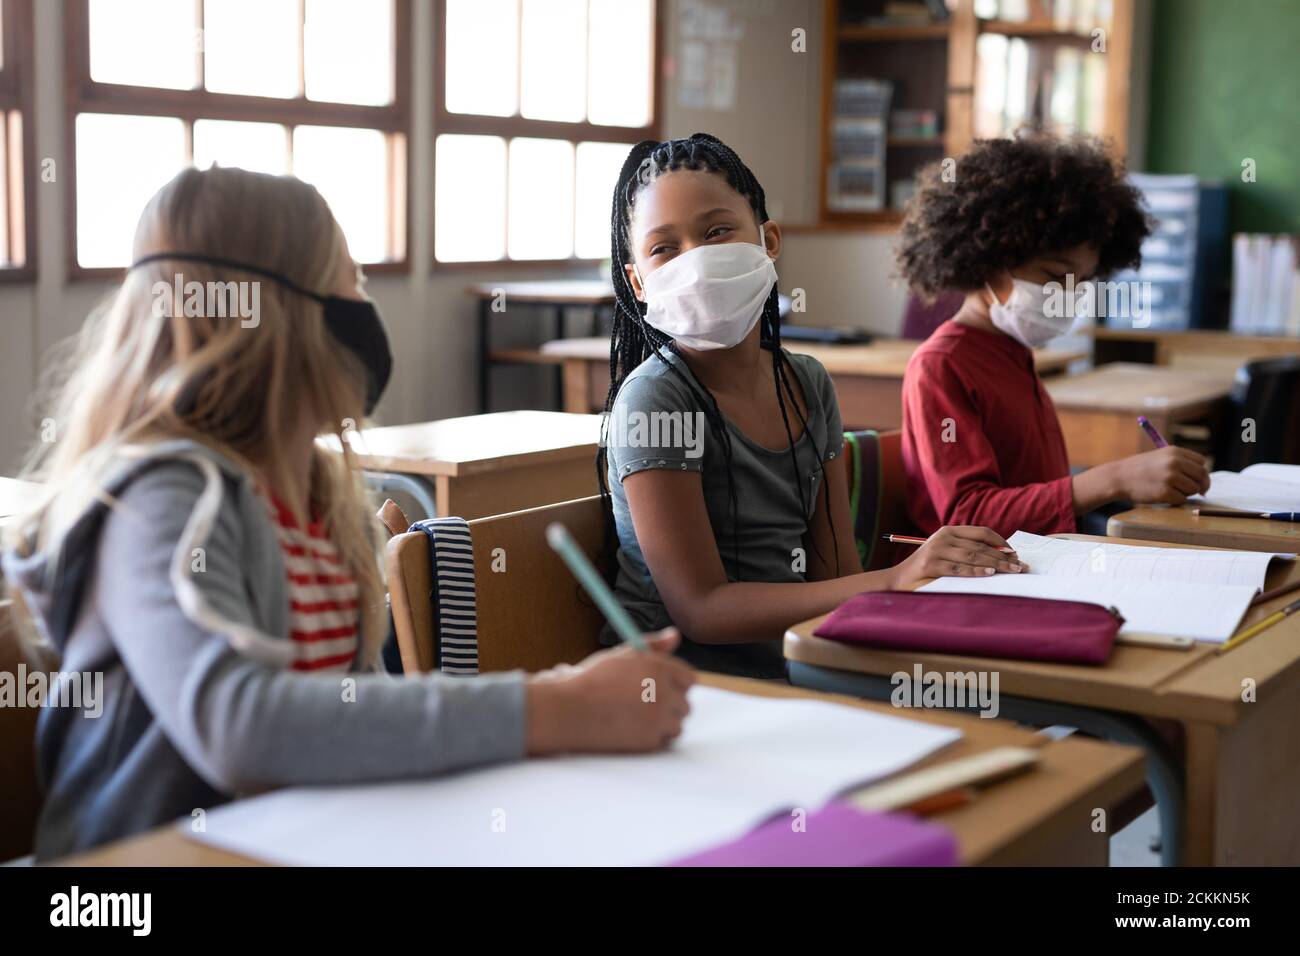 Two Girls wearing face masks talking to each other while sitting on their desk at school Stock Photo